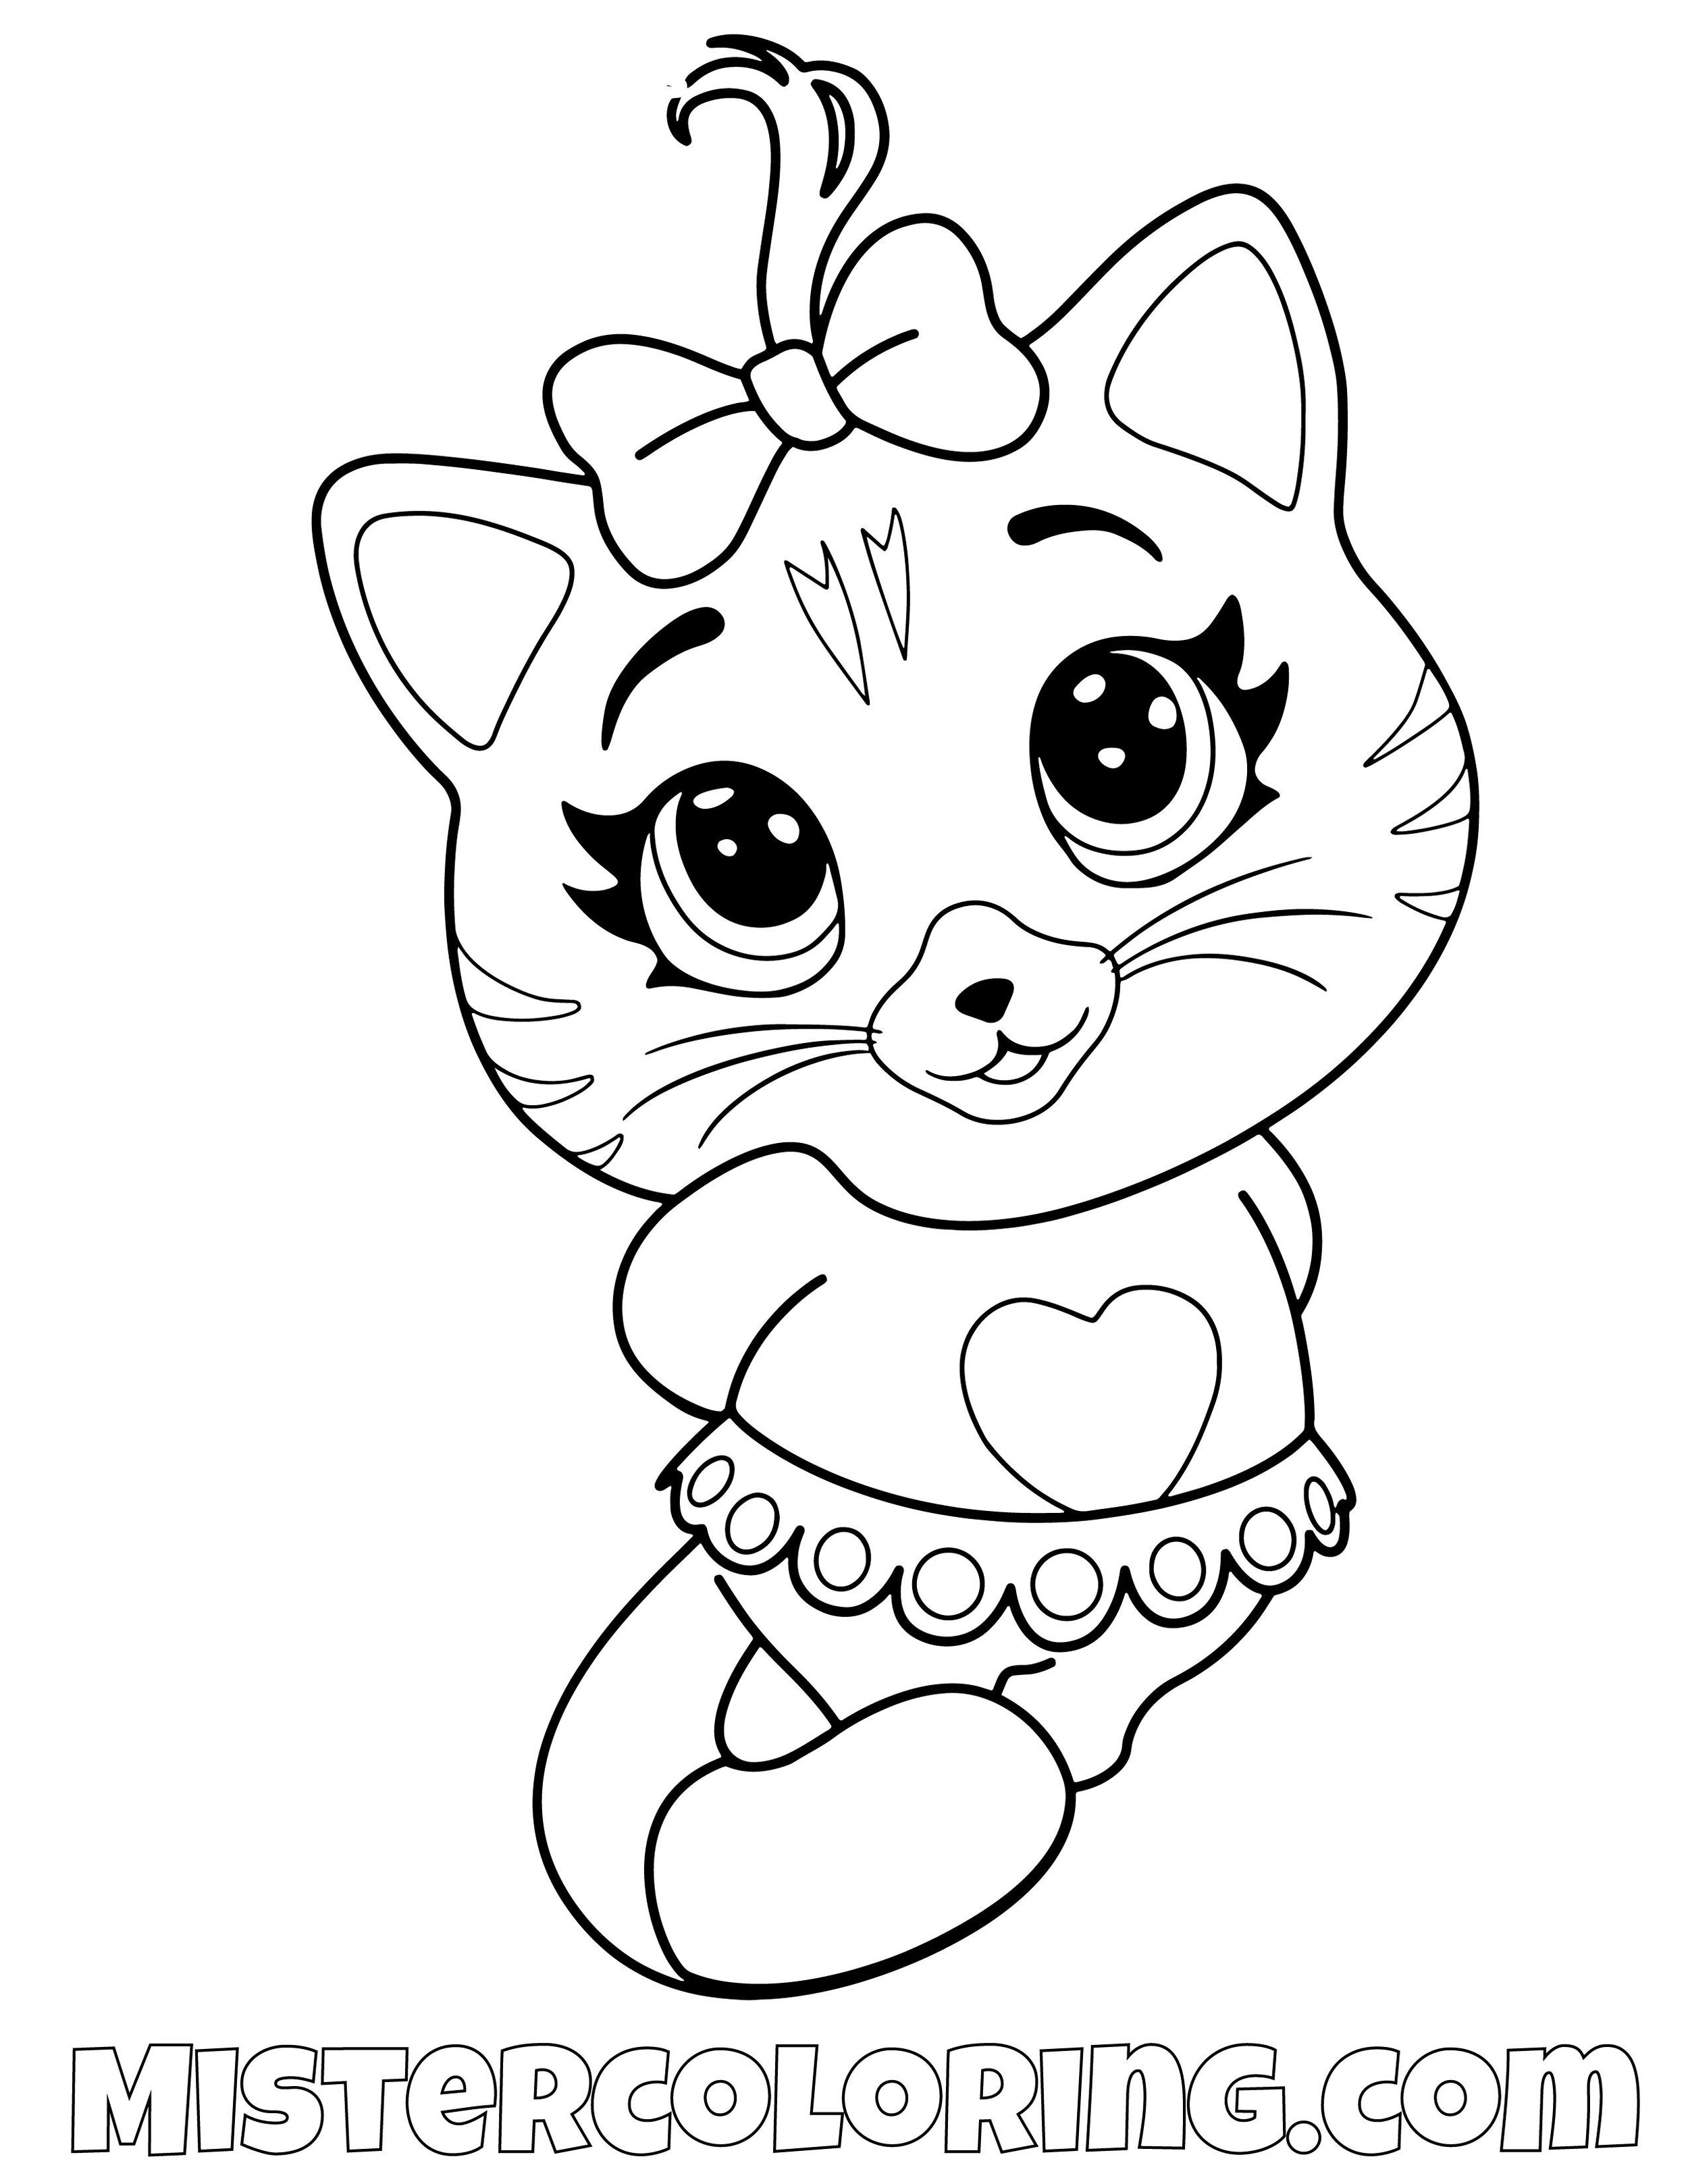 44 Cats Coloring Pages For Kidis — Mister Coloring